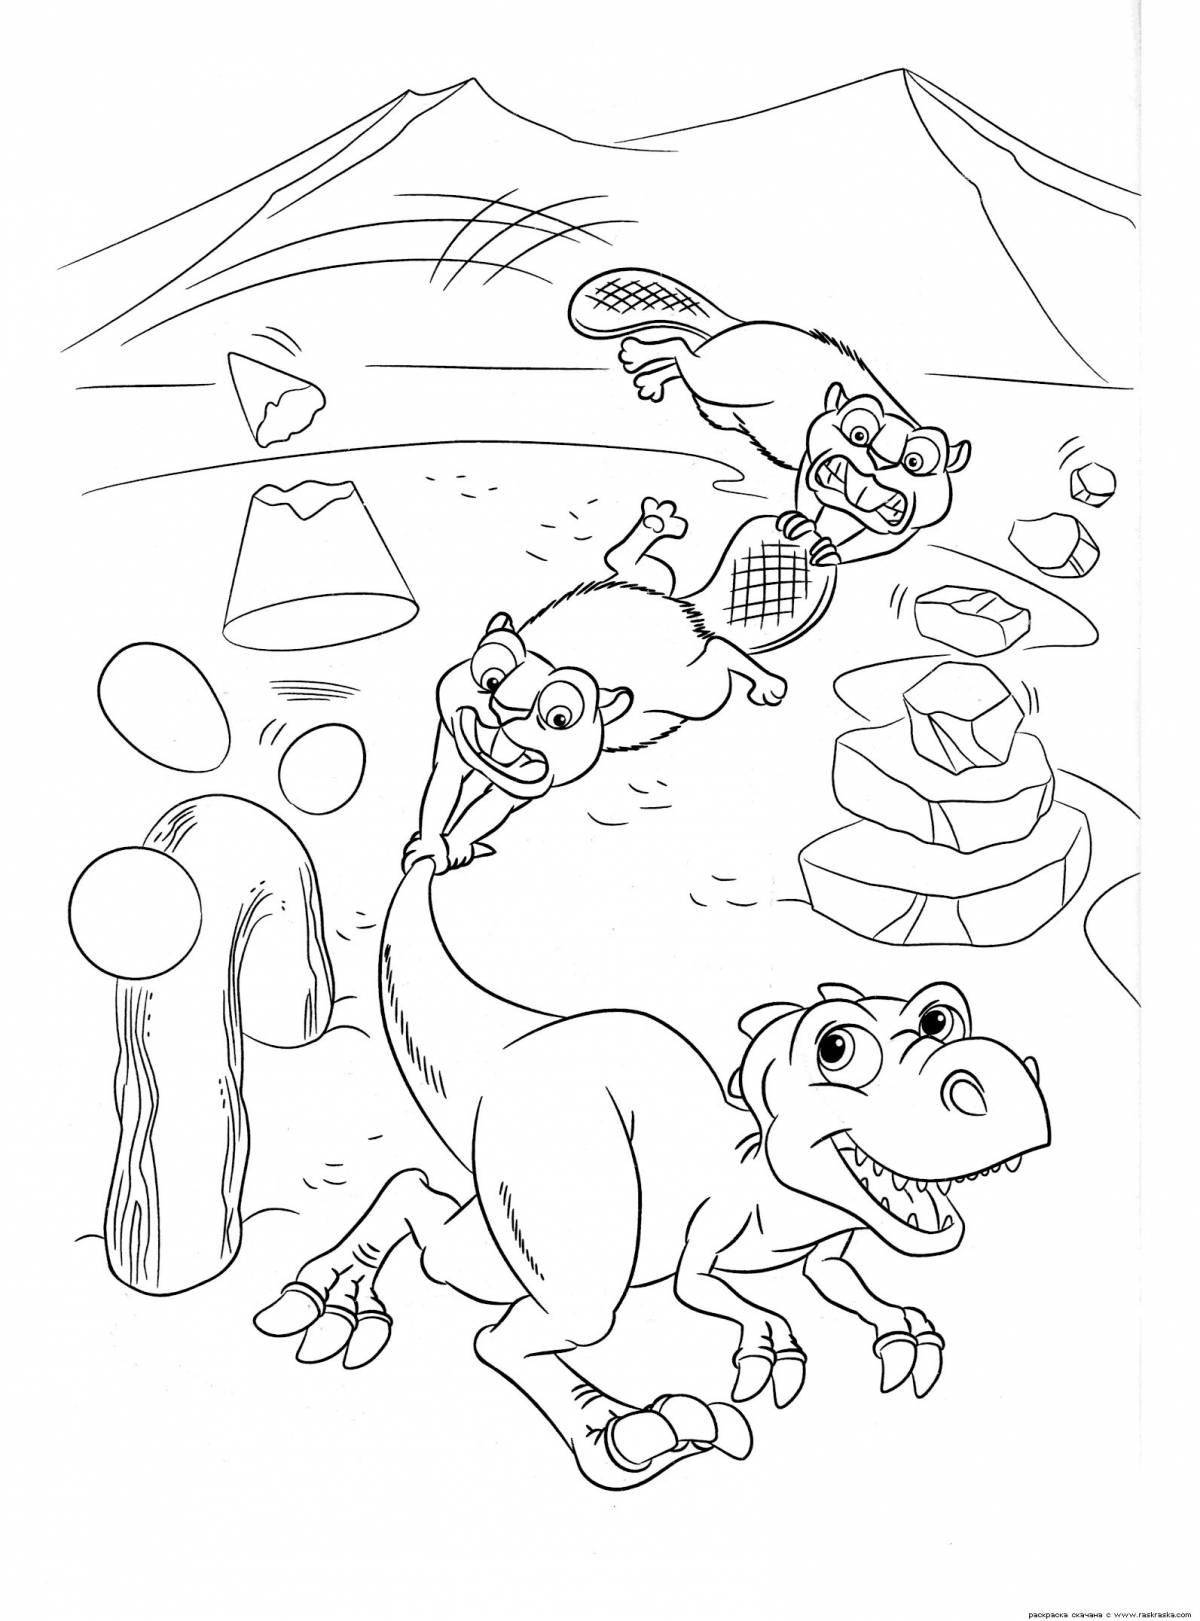 Incredible Tank Ice Age coloring page